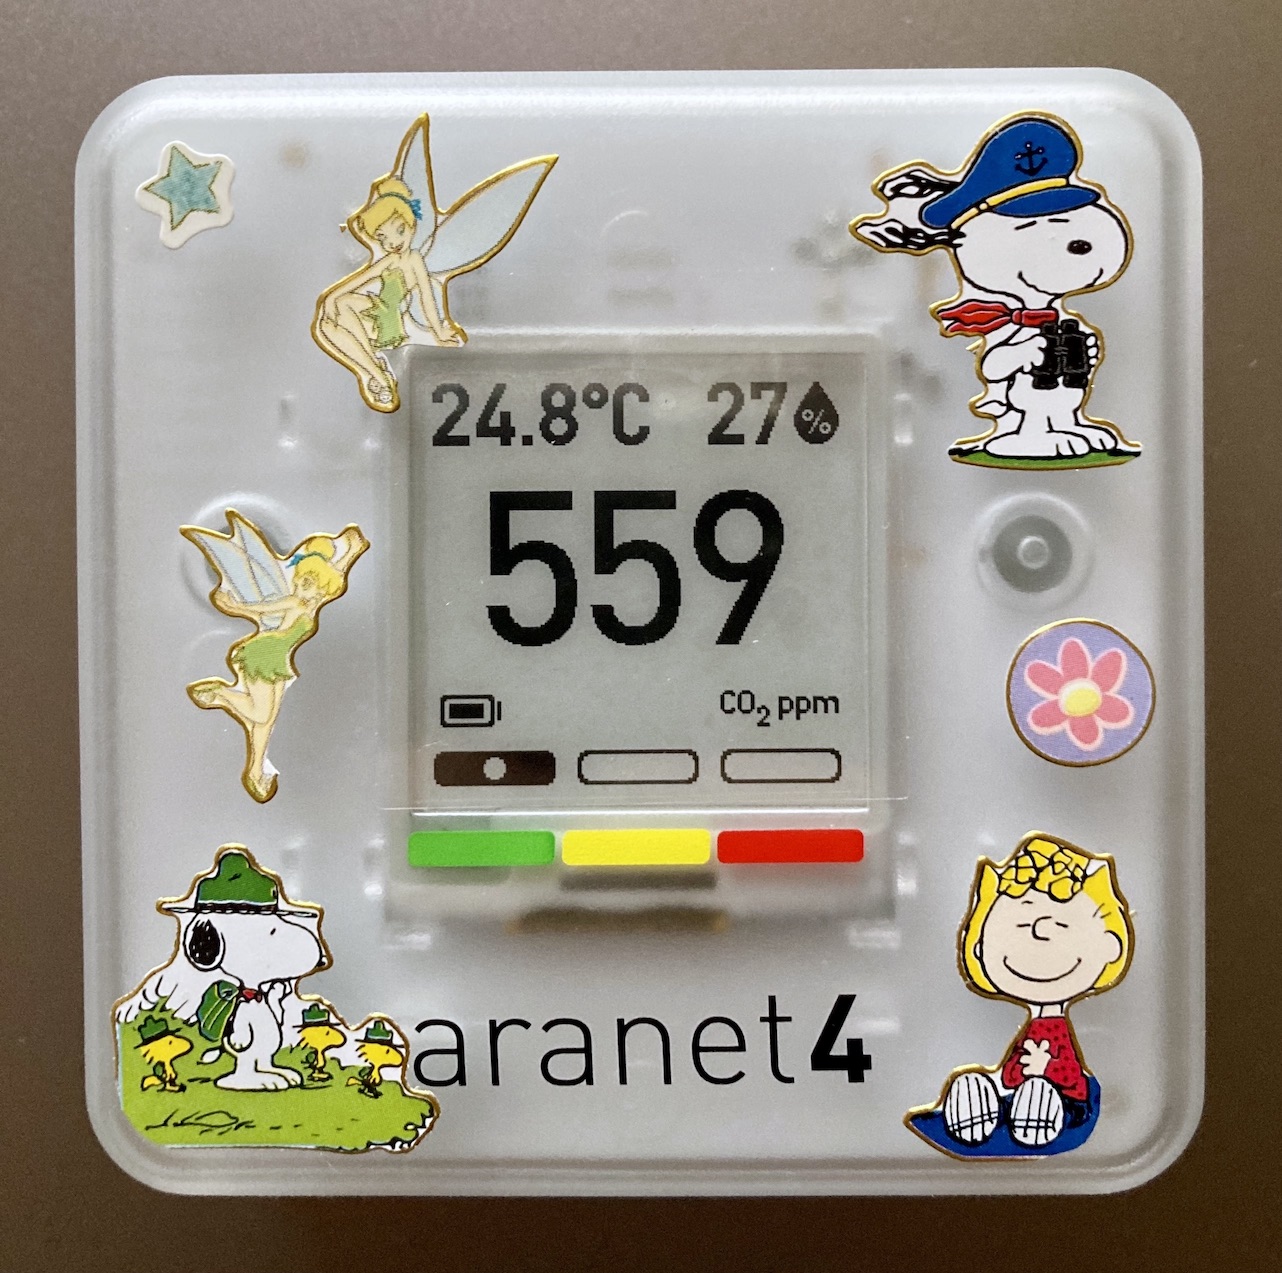 The front side of an Aranet4 device. The space surrounding the screen has been decorated with various small stickers depicting Tinkerbell and characters from Peanuts.